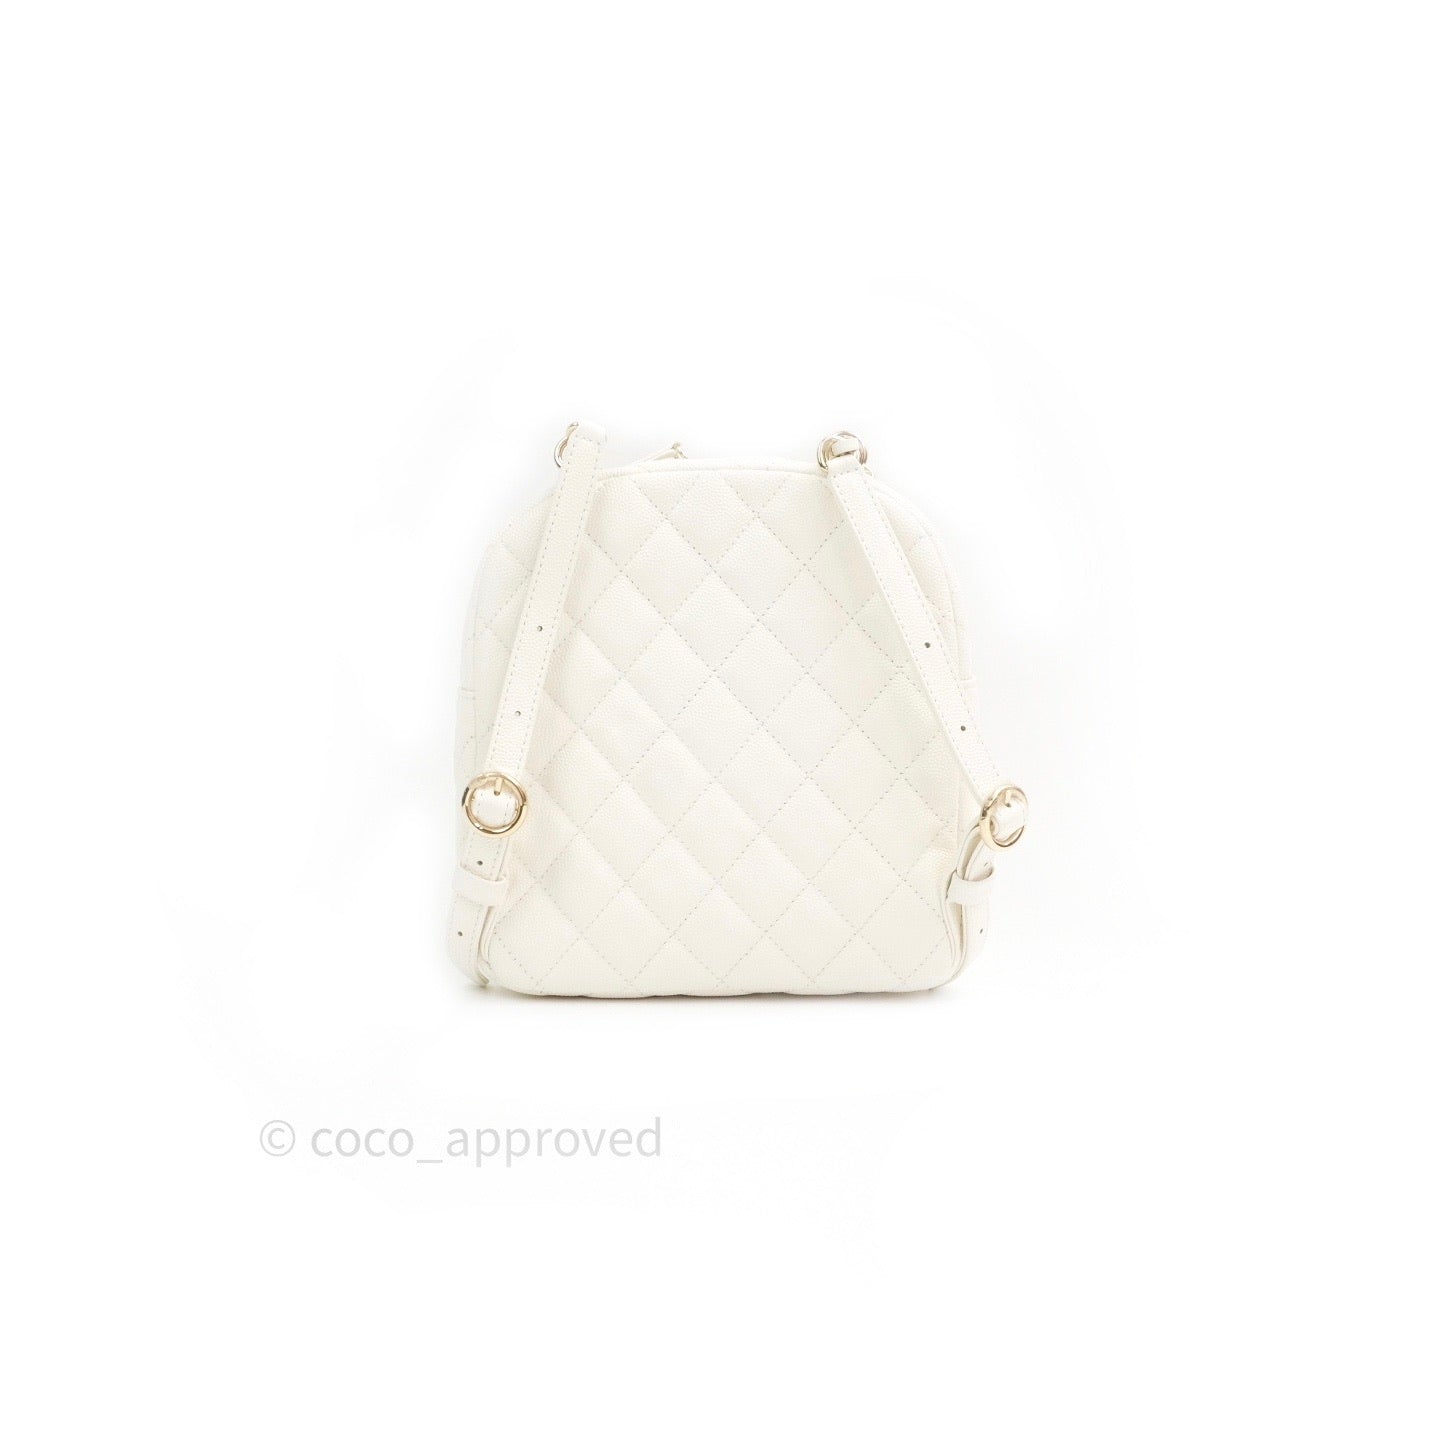 coco chanel backpack